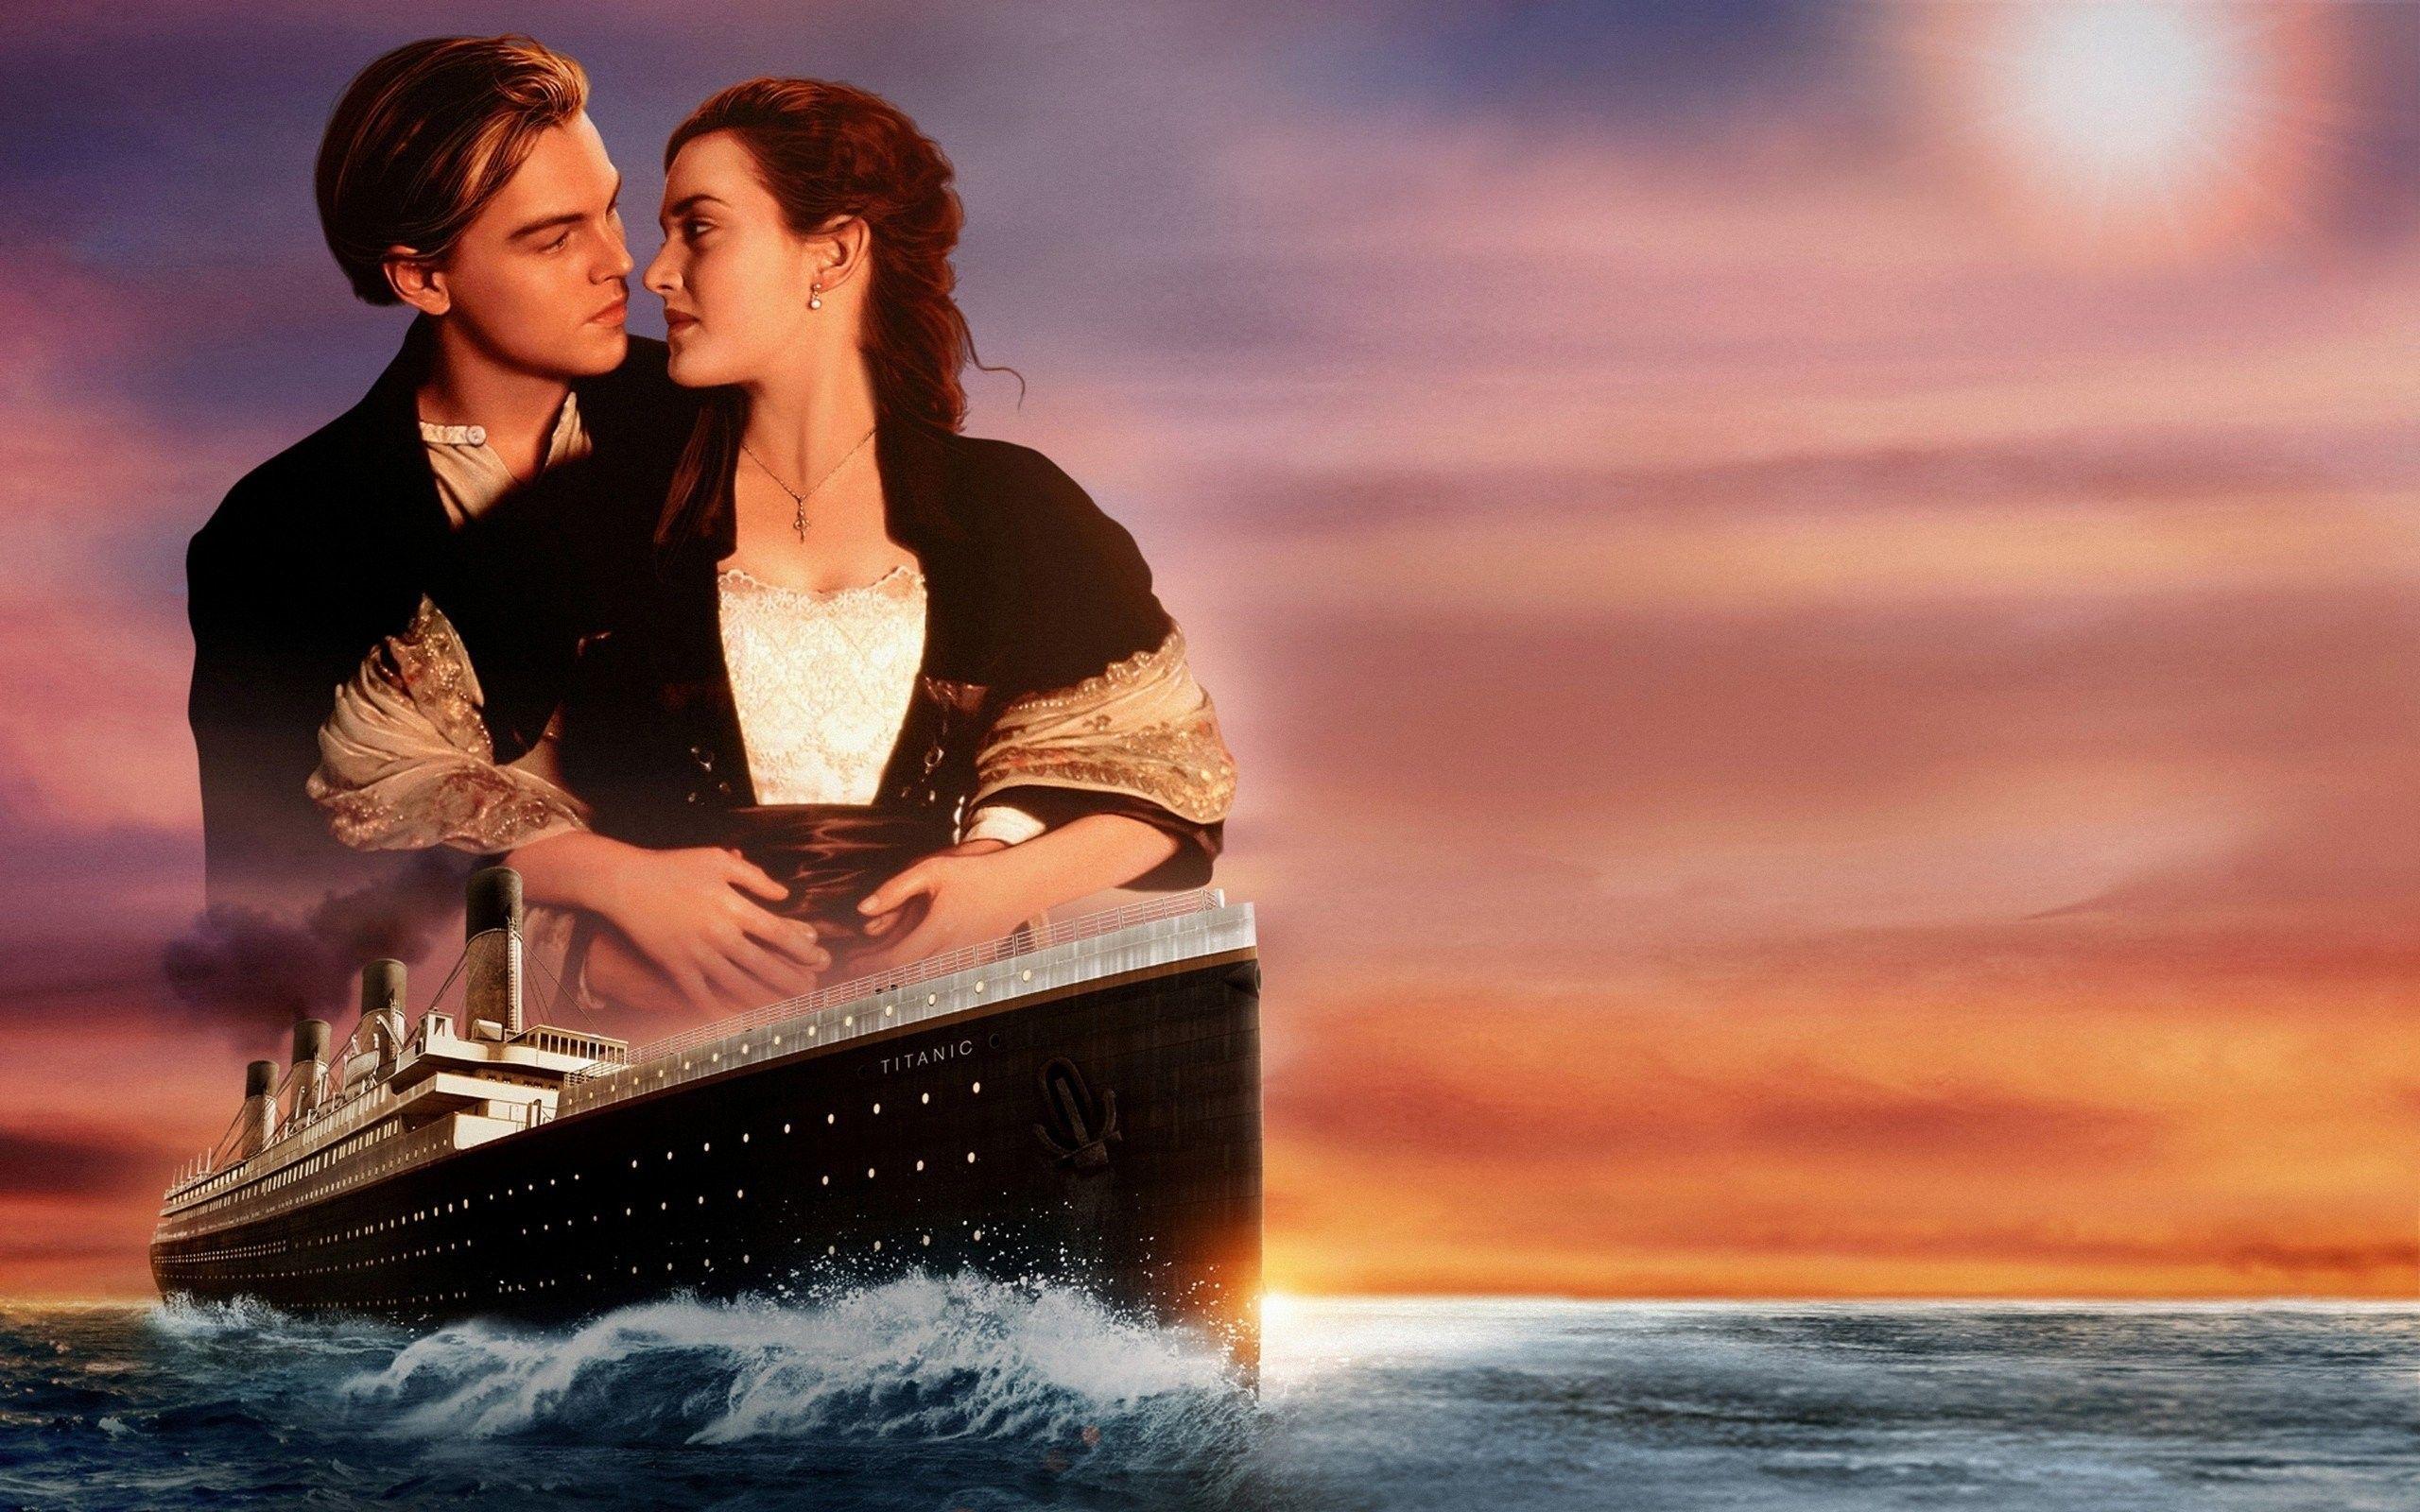 40 Best Titanic Quotes: Famous Lines from Rose, Jack and Other Characters -  Parade